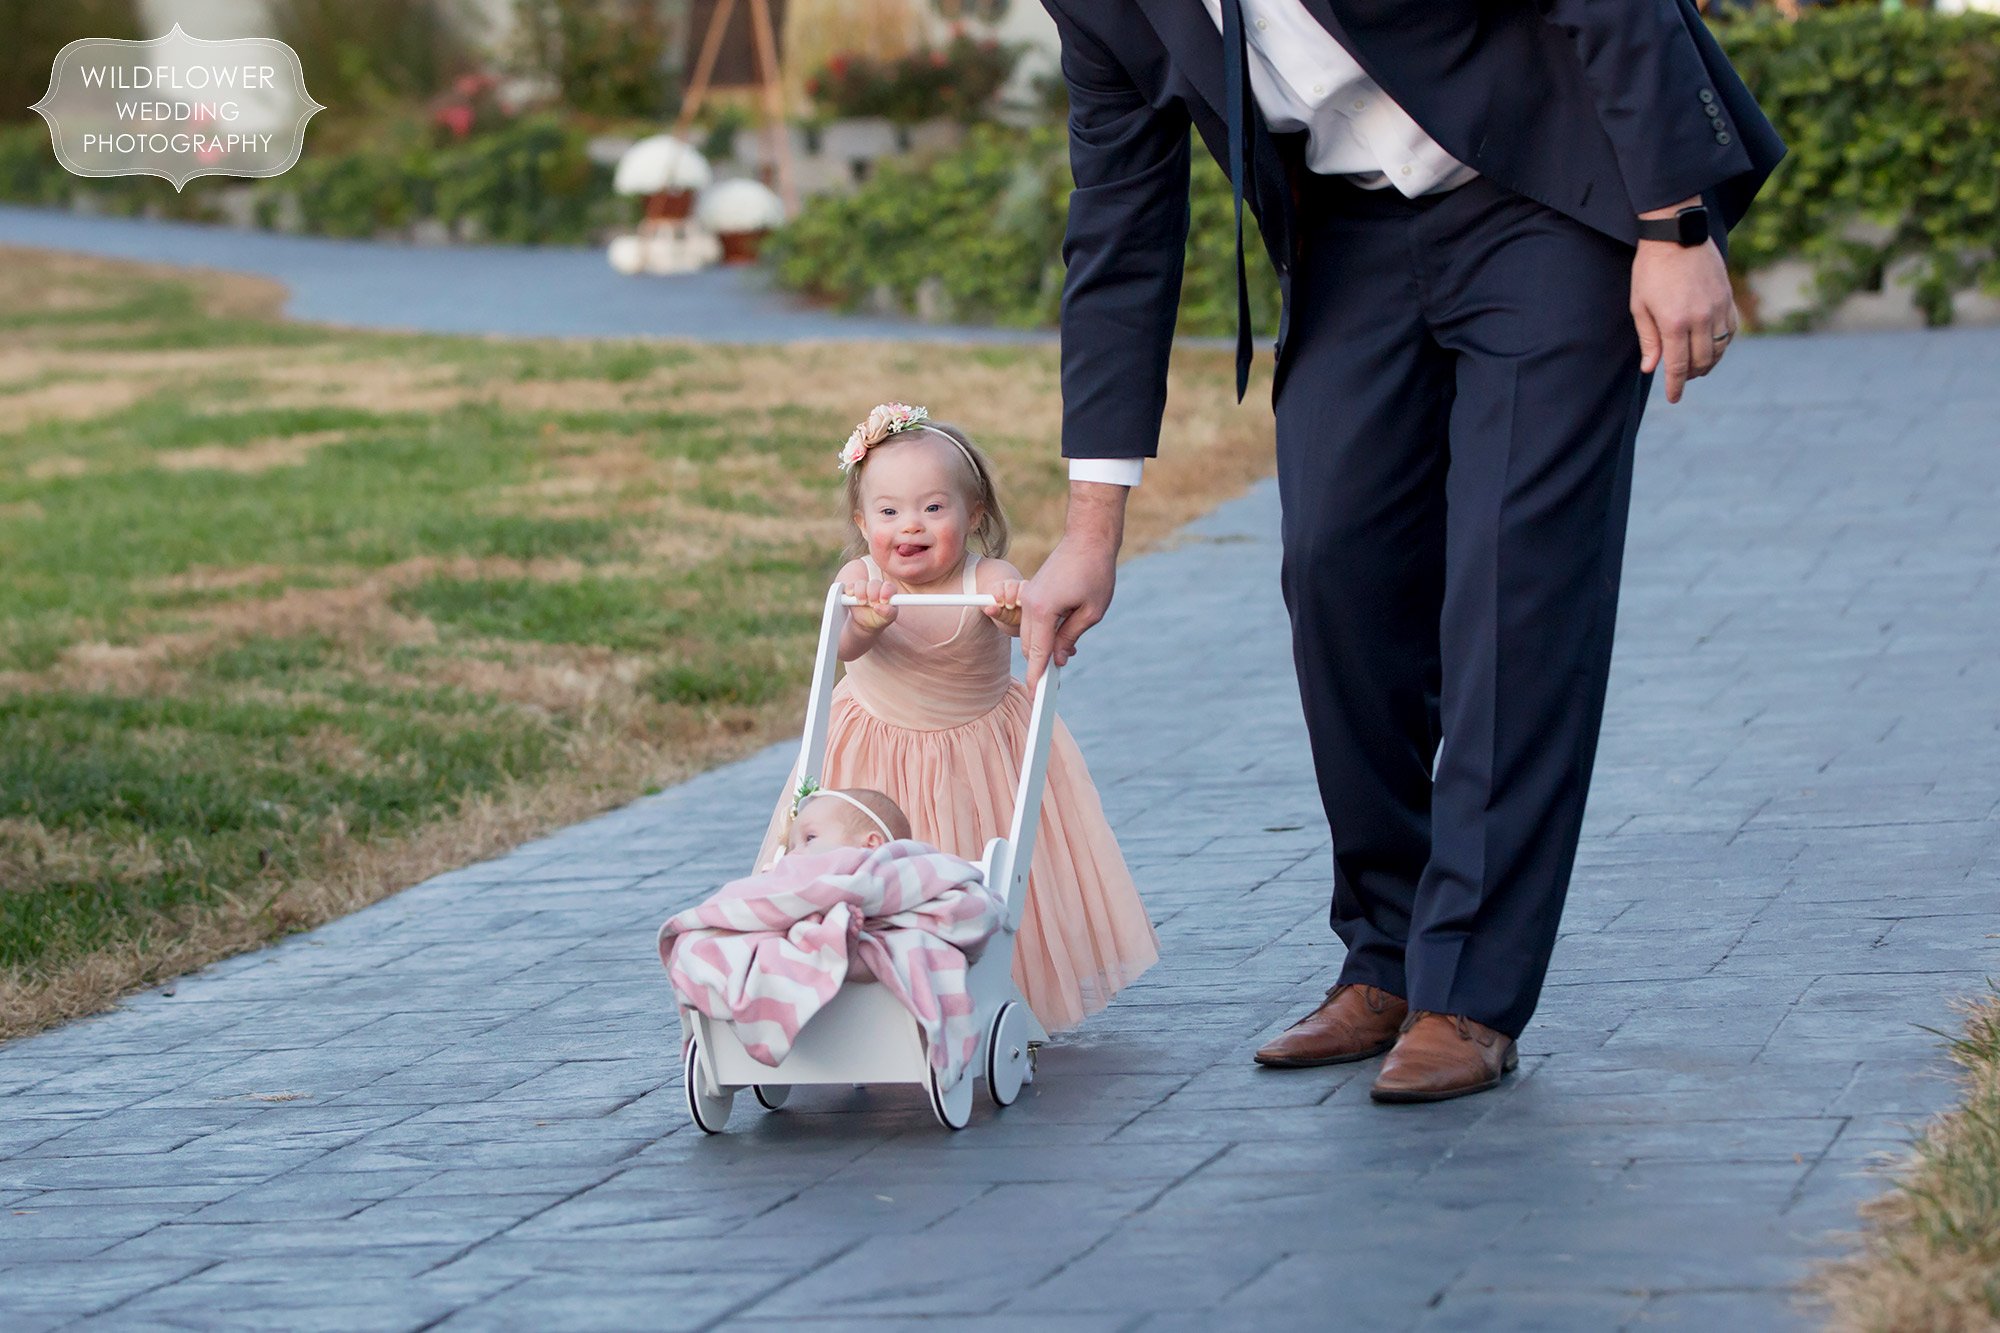 This sweet toddler flower girls is helped down the aisle by her dad at Les Bourgeois.